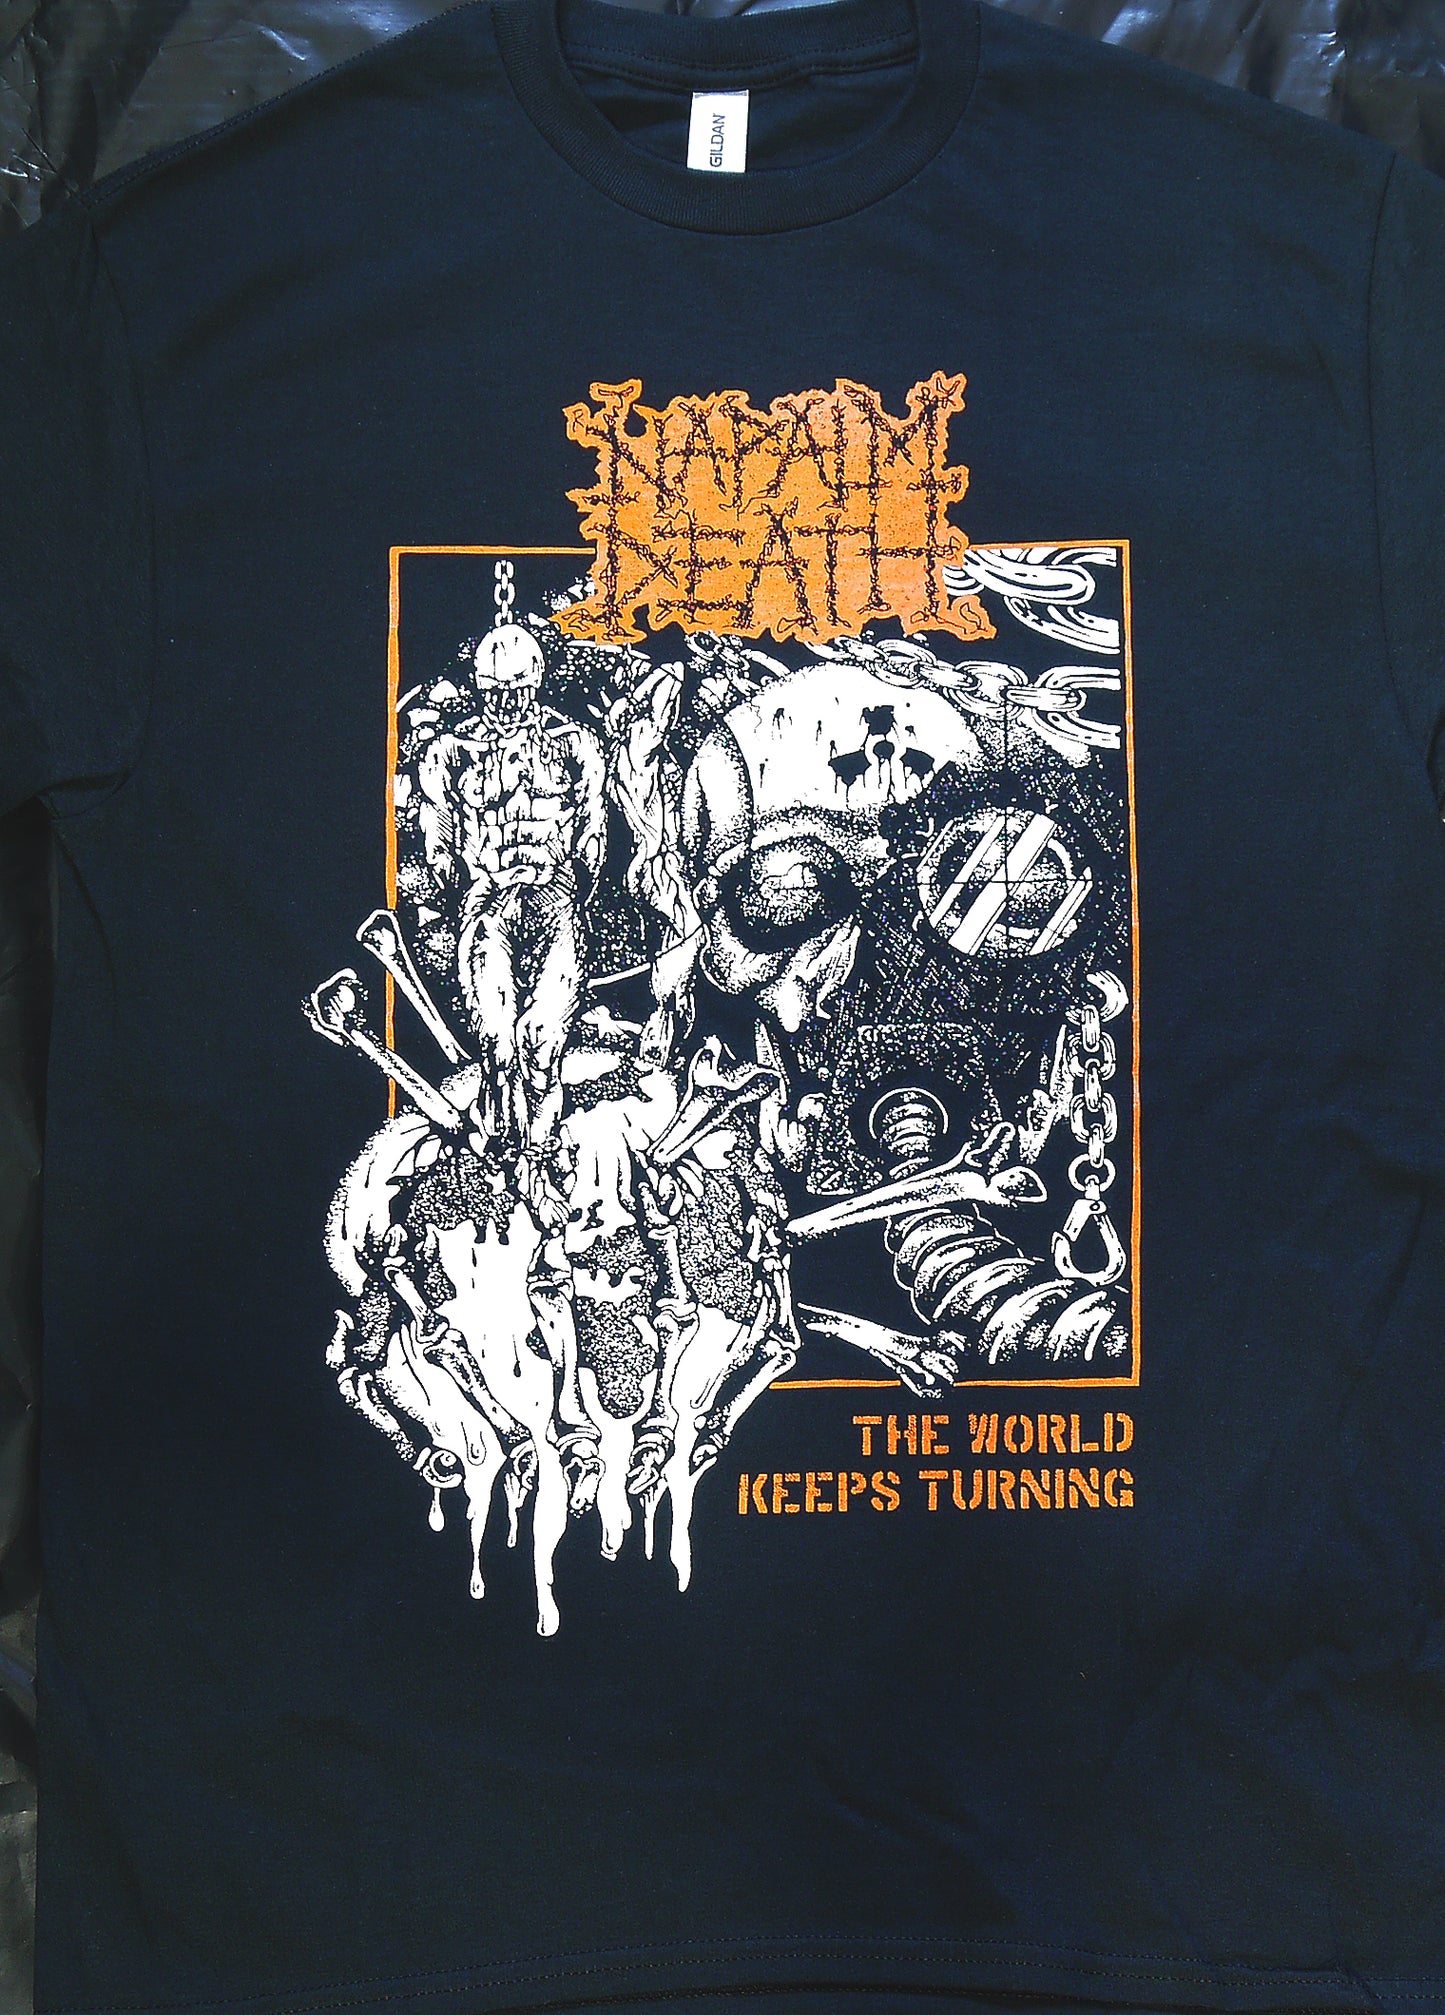 NAPALM DEATH - The World Keeps Turning T-shirt